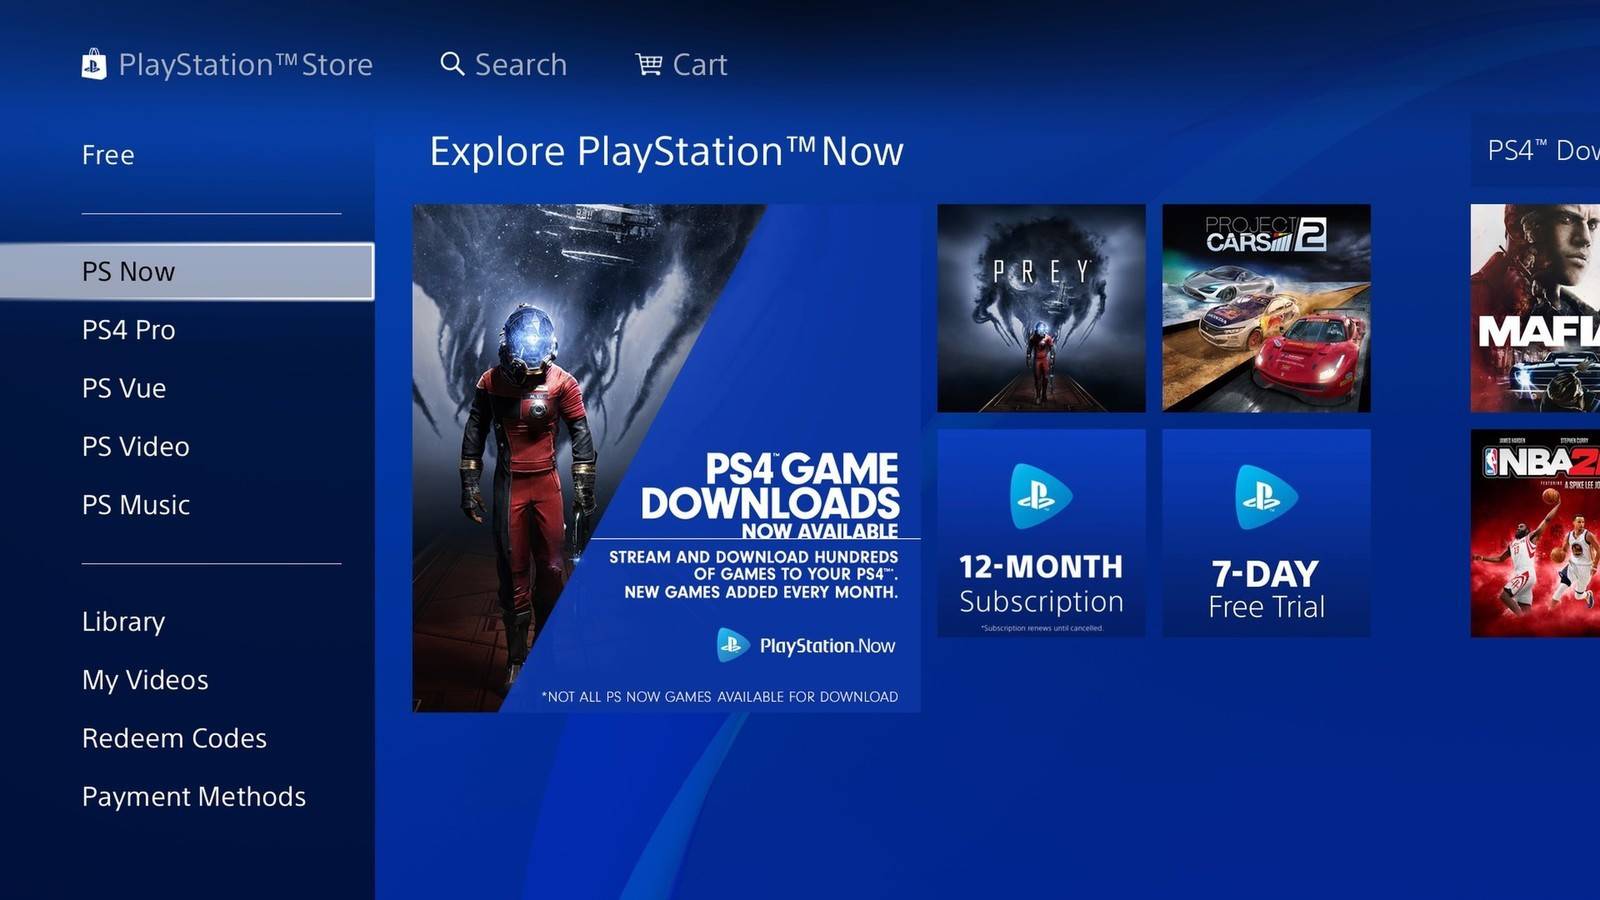 ps now 1 month code